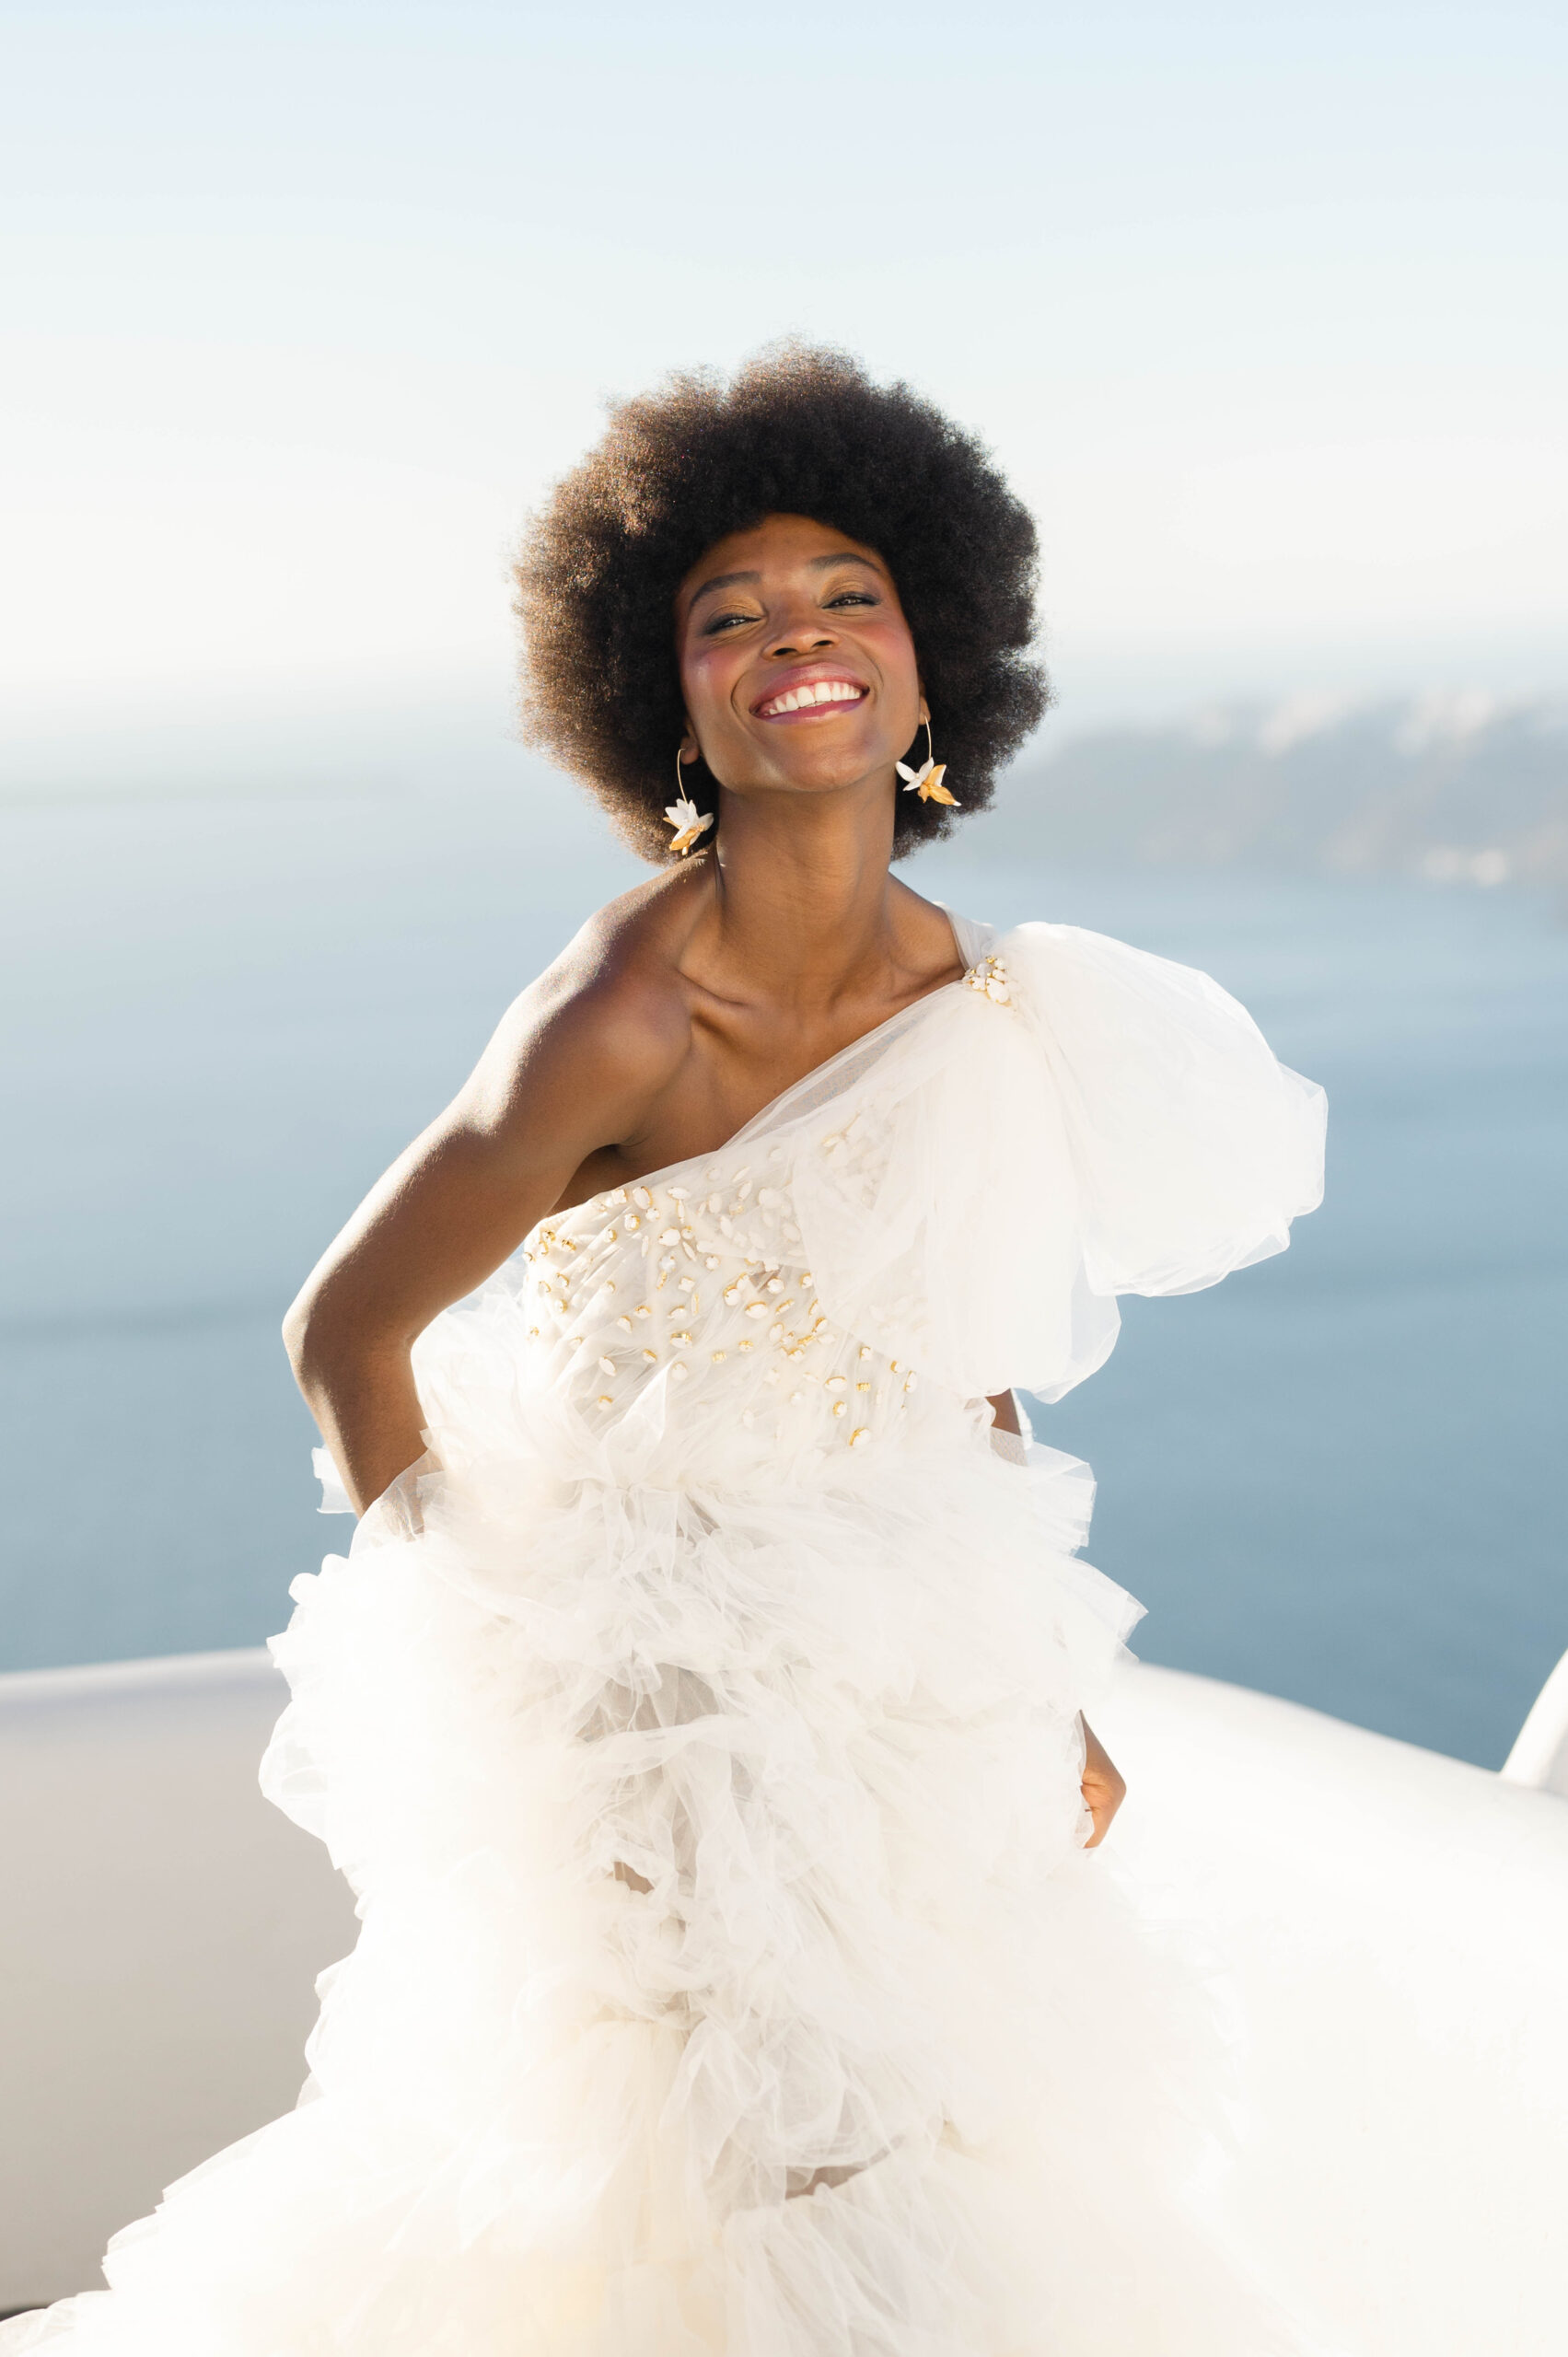 A beautiful Bride smiling in a couture wedding dress at Golden Hour in Santorini, Greece